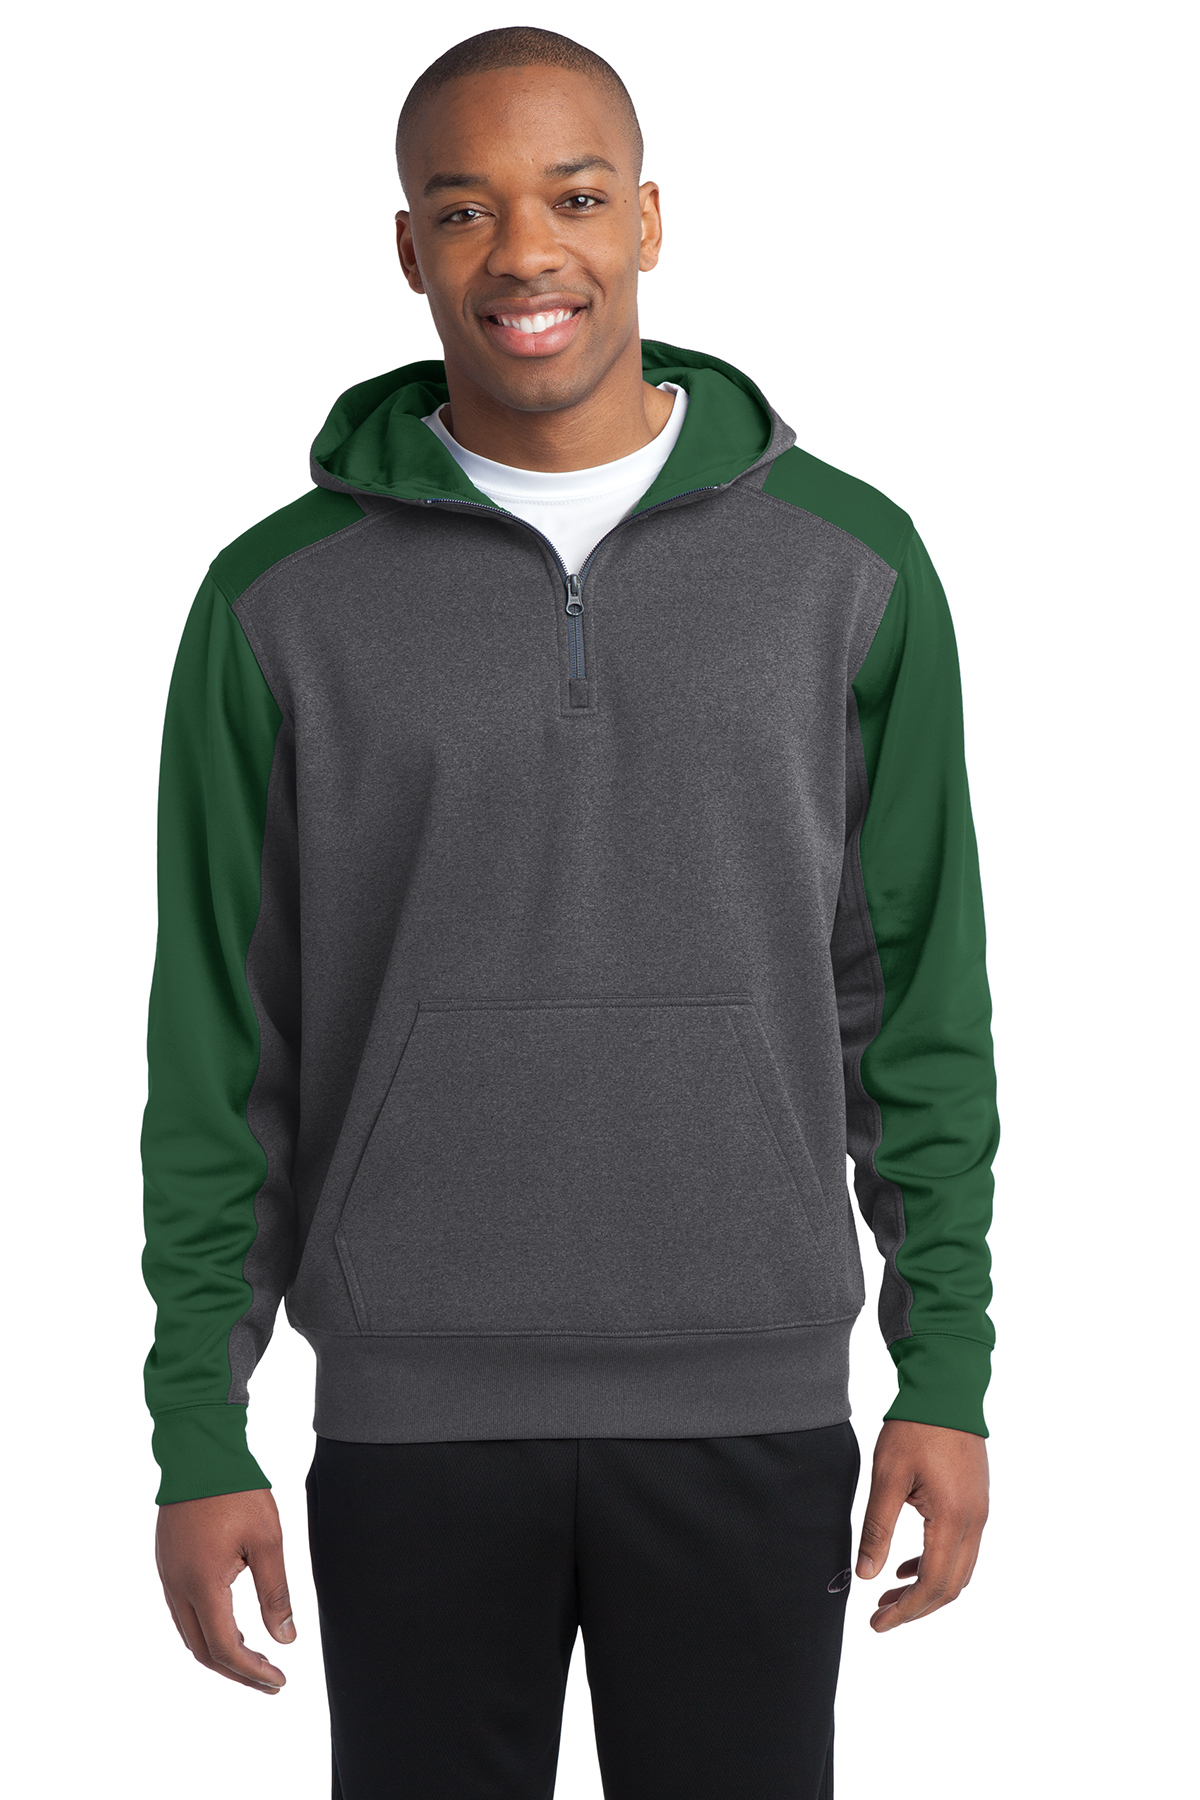 click to view Graphite Heather/Forest Green